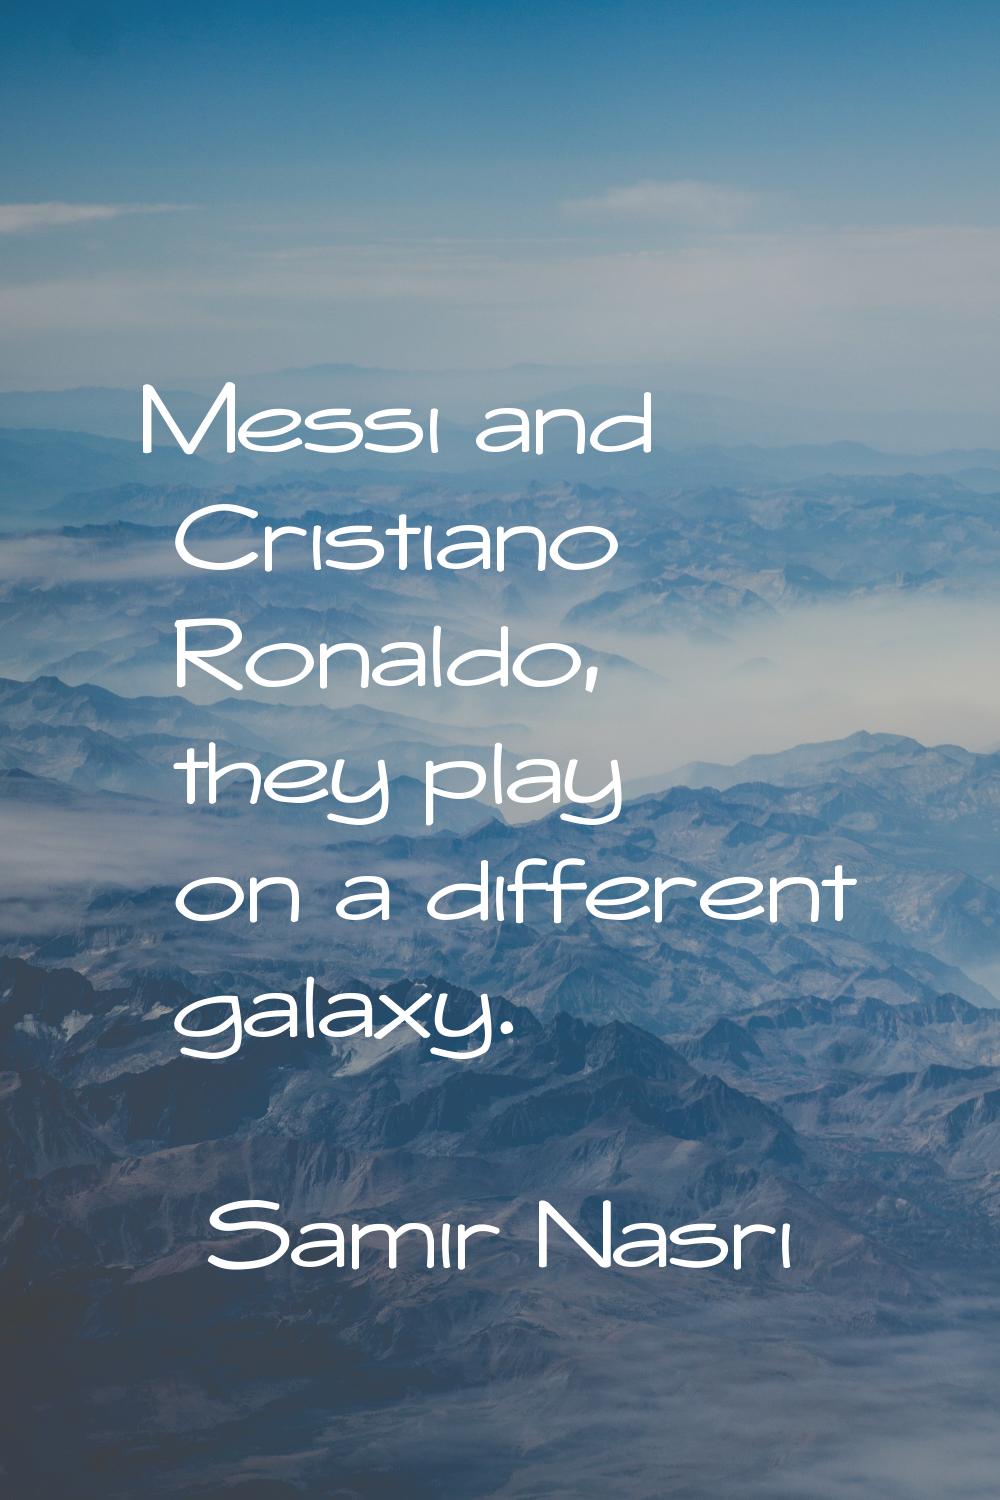 Messi and Cristiano Ronaldo, they play on a different galaxy.